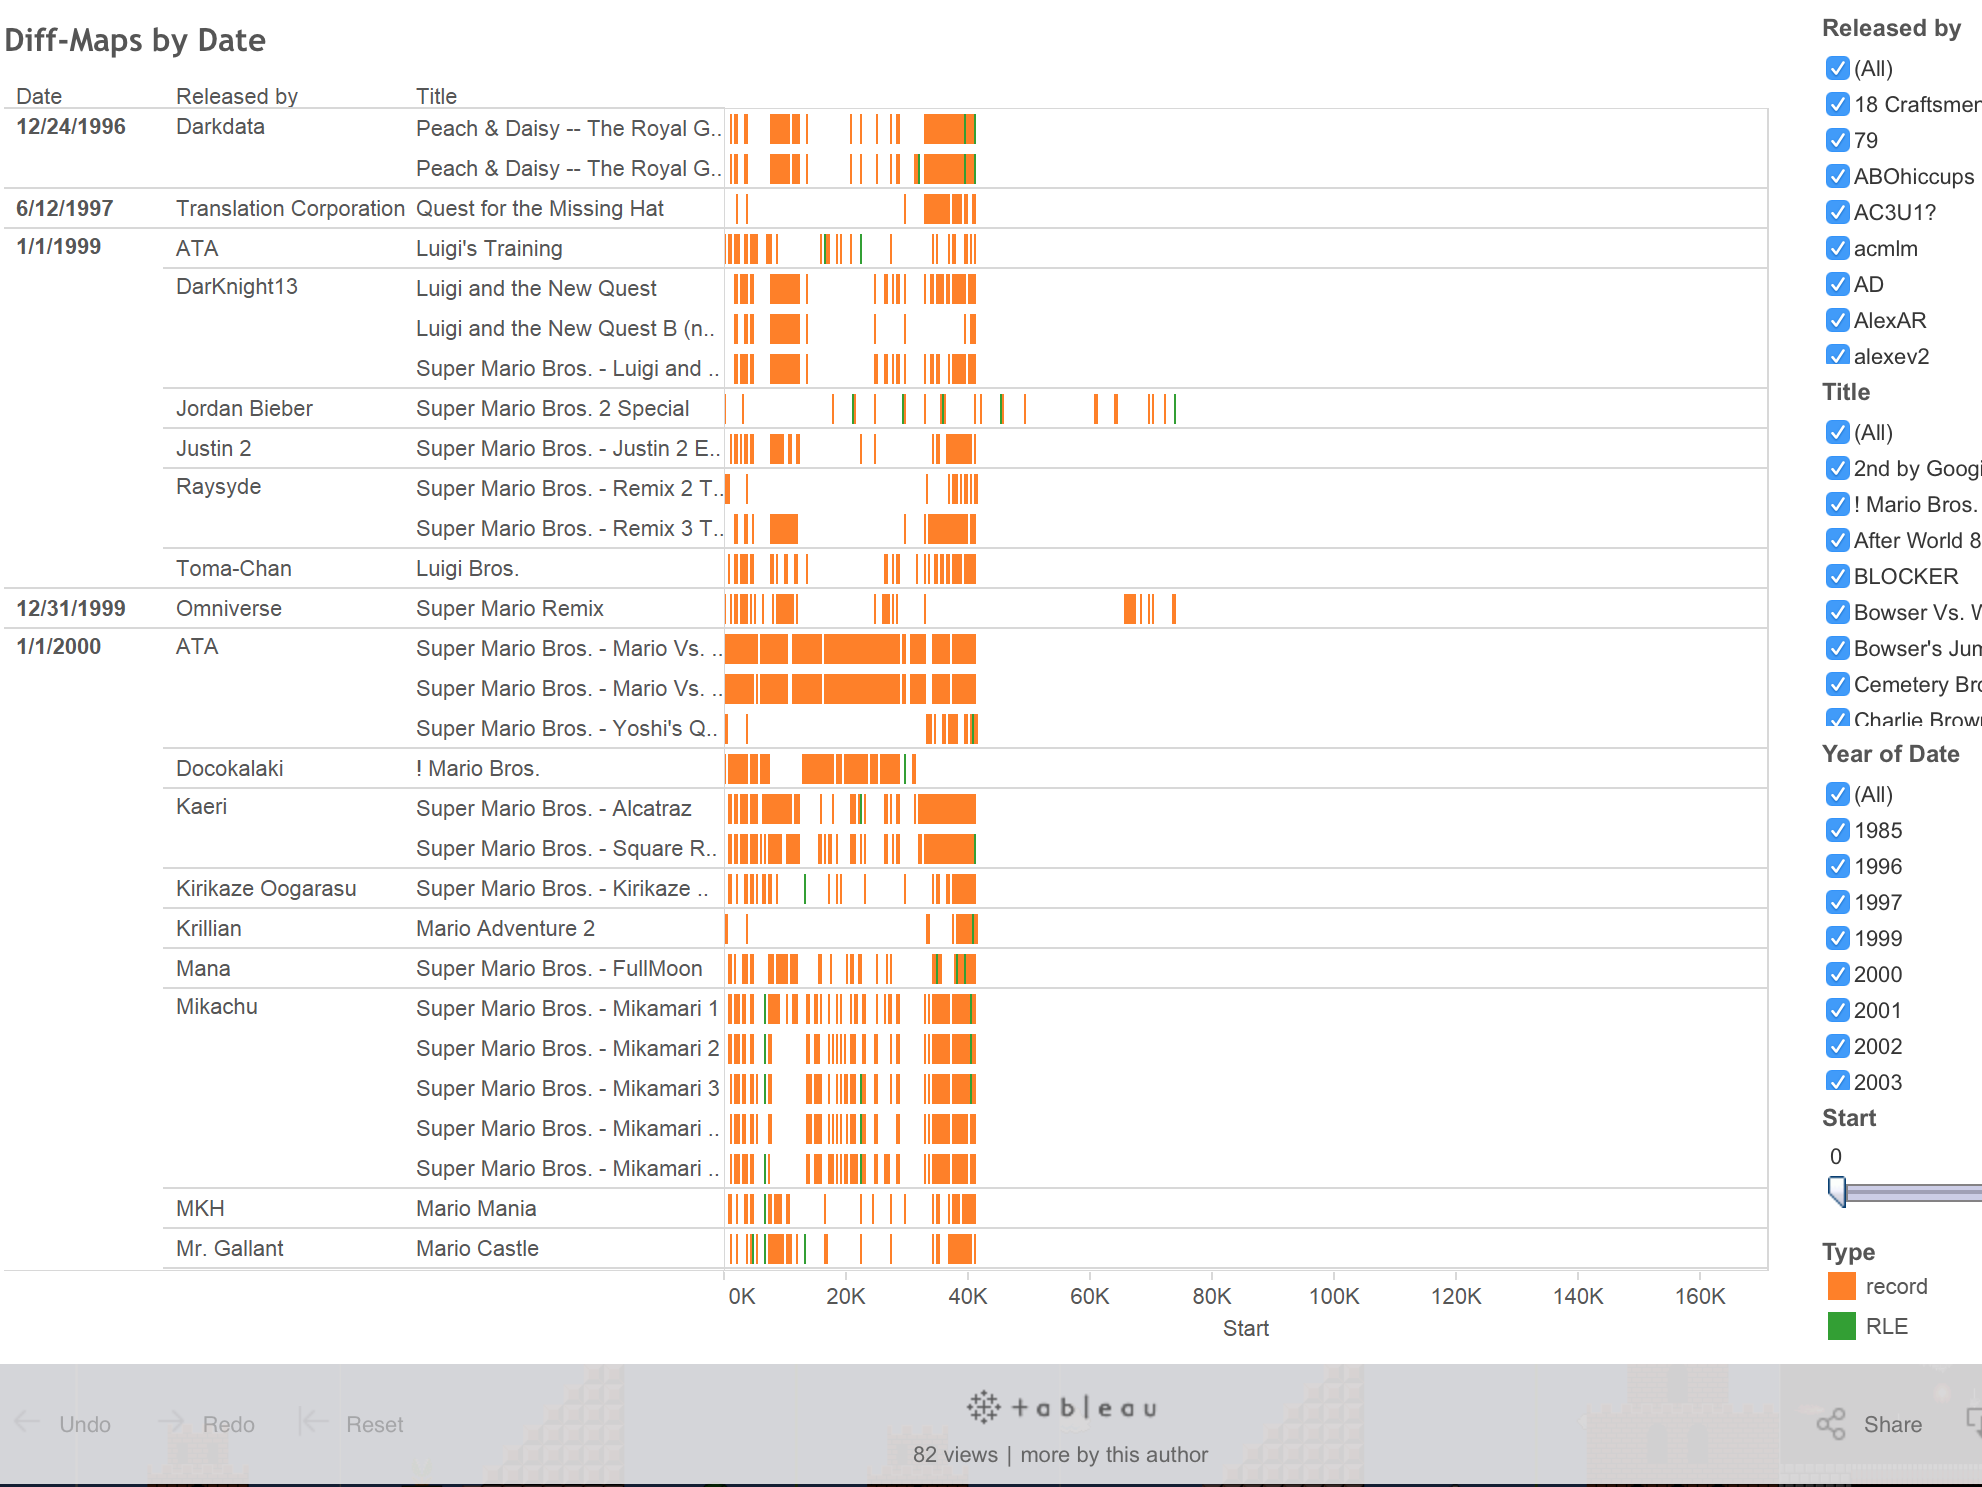 Tableau visualization: Diff Maps sorted by Date